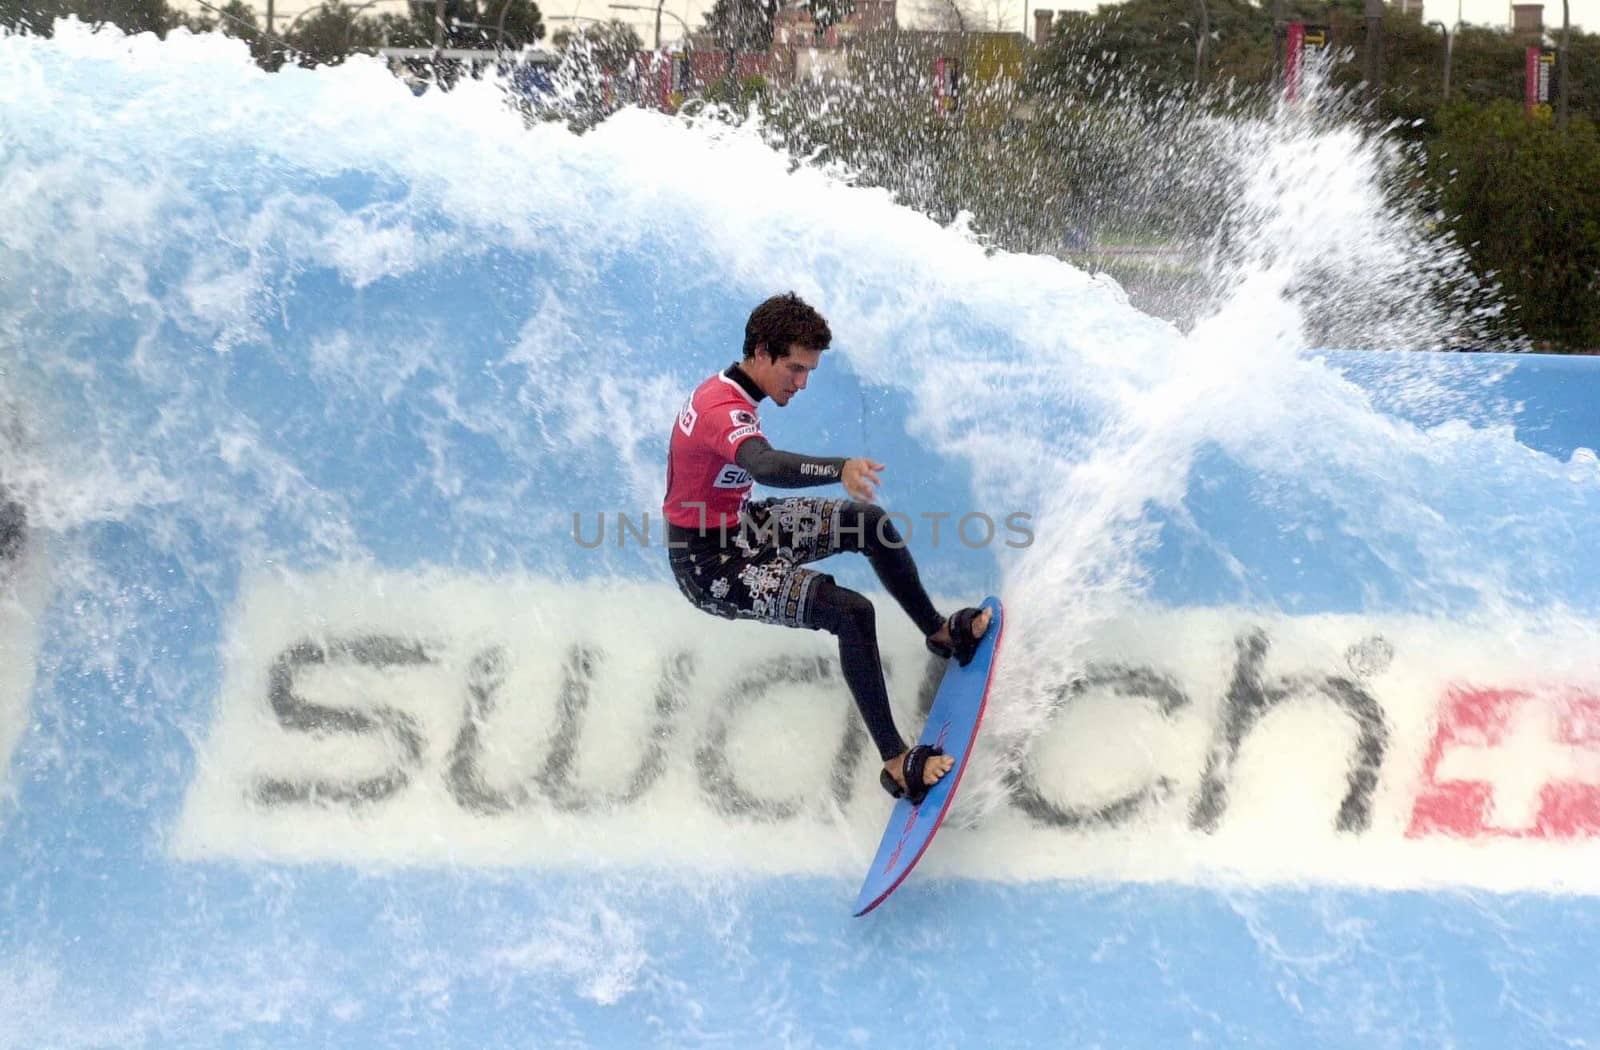 Rob Machado at the Swatch Wave Tour surf competition and rock concert at the Queen Mary in Long Beach, 02-02-00